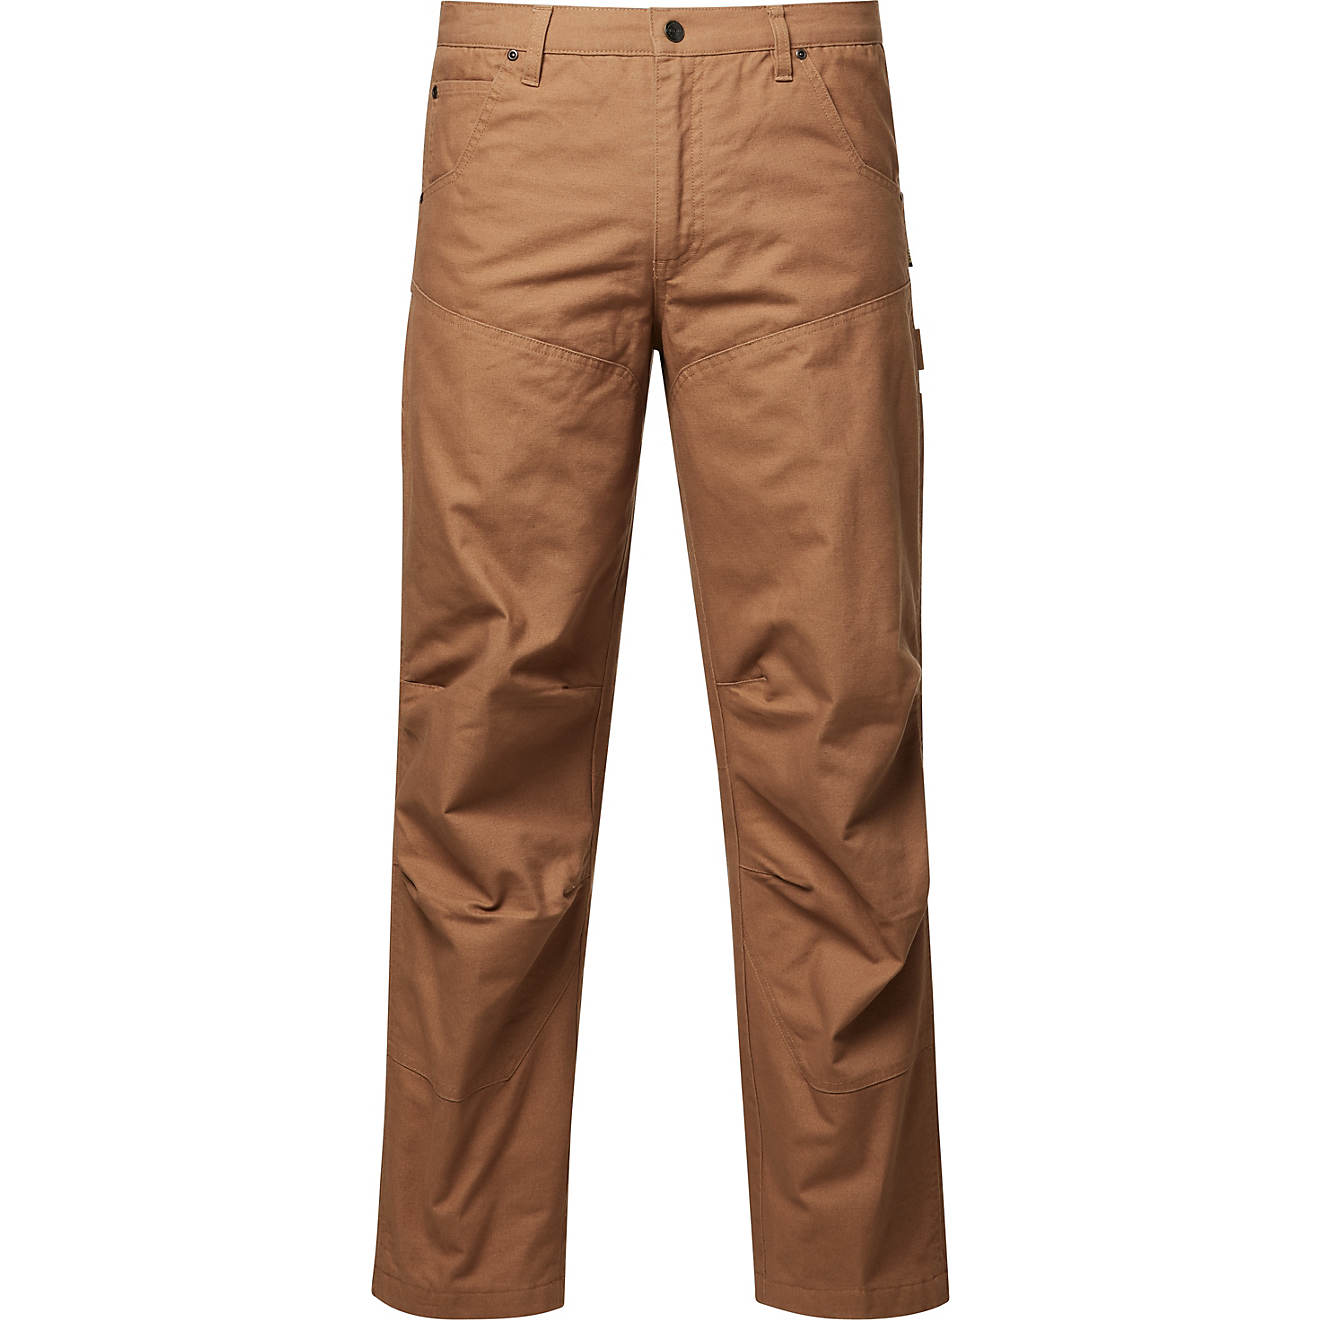 Brazos Men's Carpenter Insulated Work Pants                                                                                      - view number 1